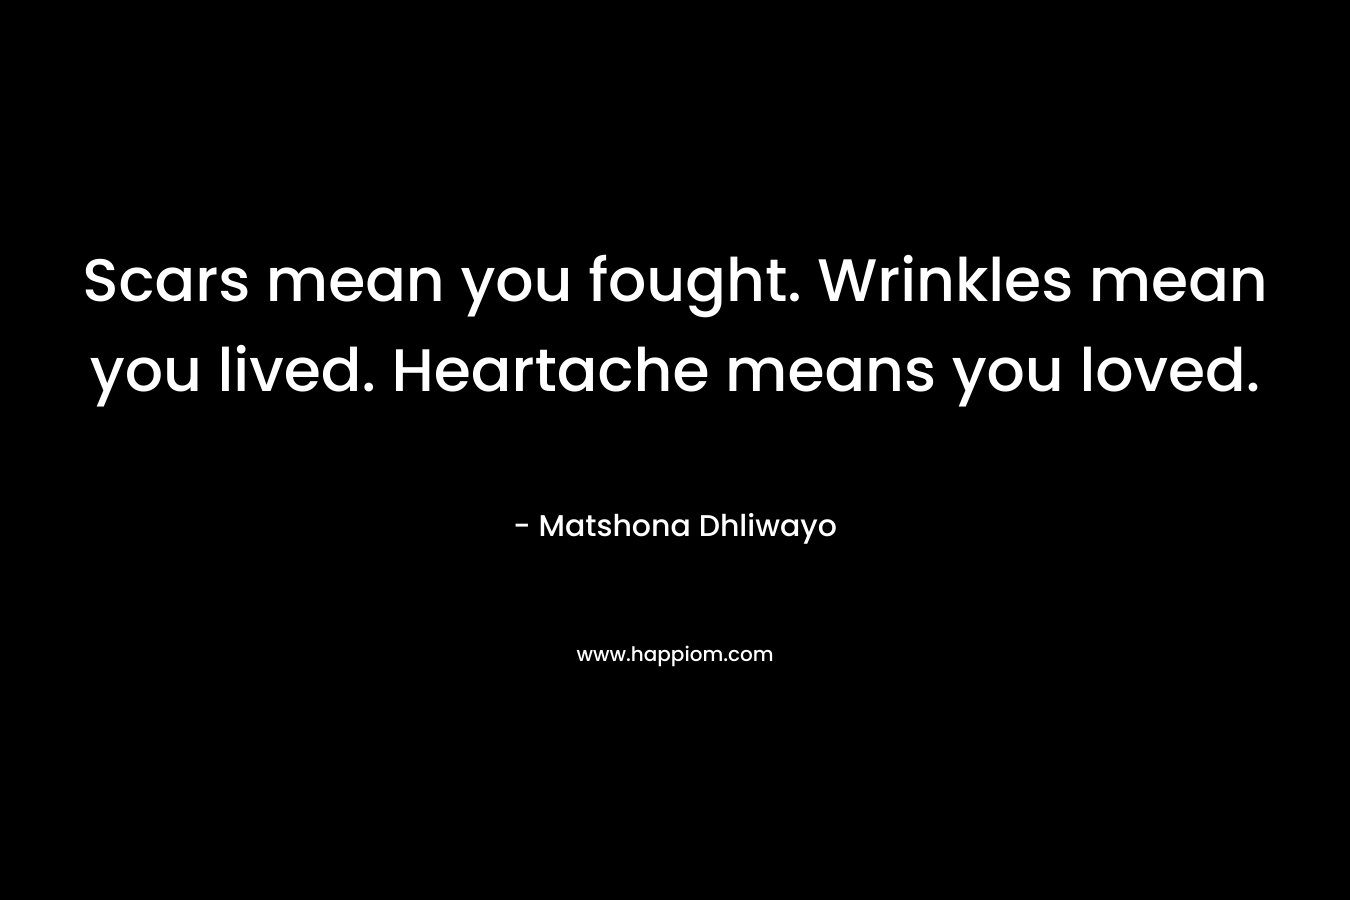 Scars mean you fought. Wrinkles mean you lived. Heartache means you loved.